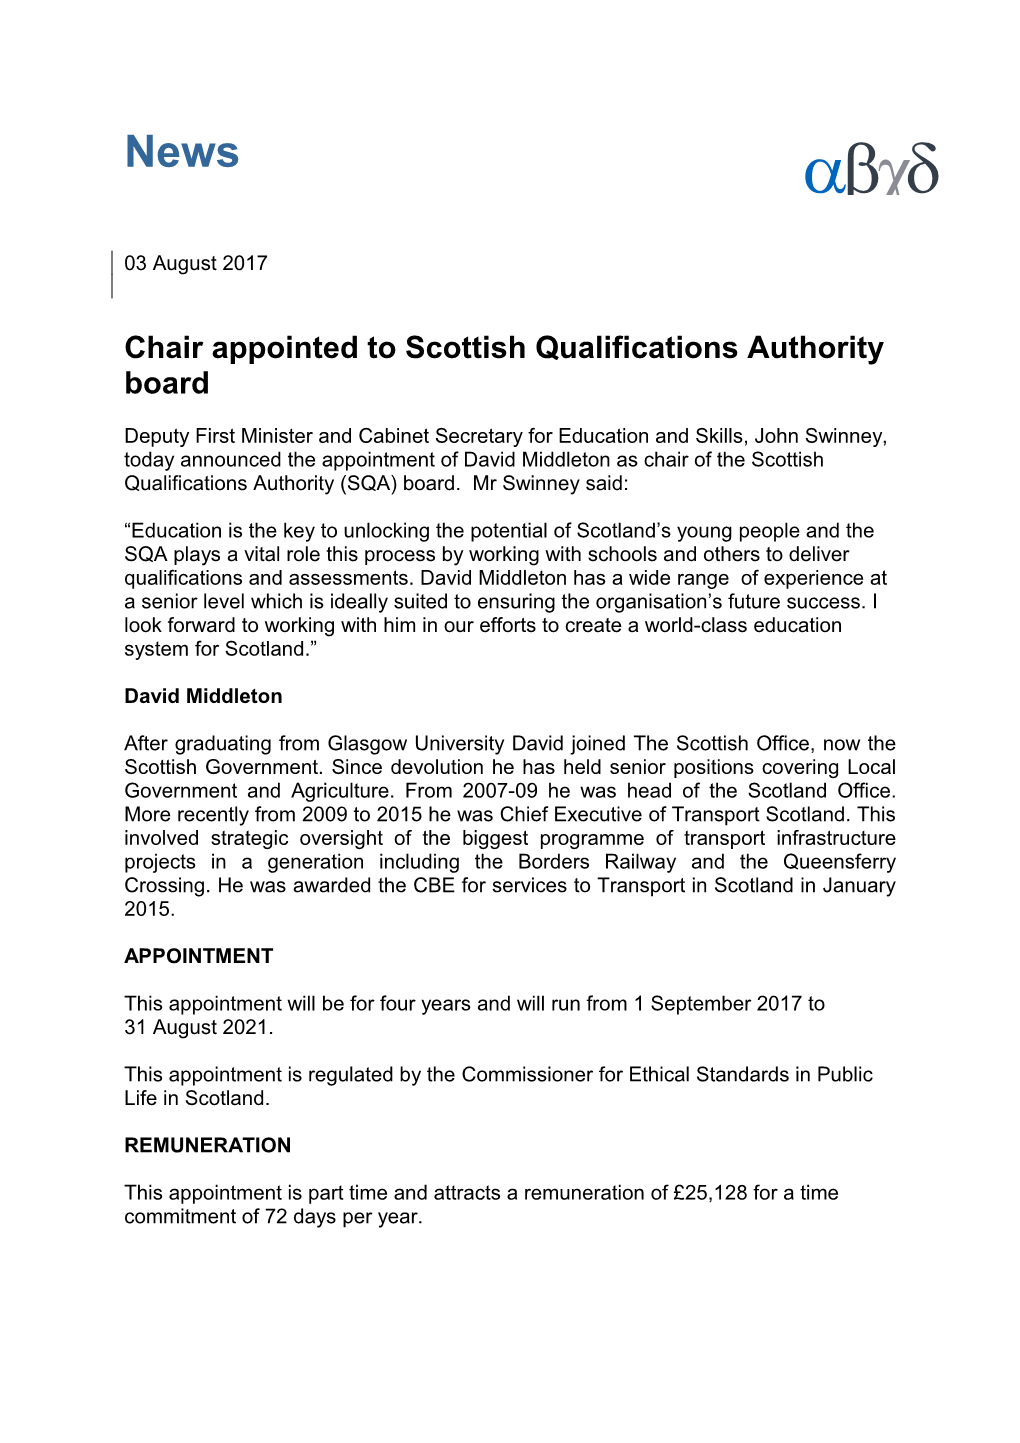 Chair Appointed to Scottish Qualifications Authority Board